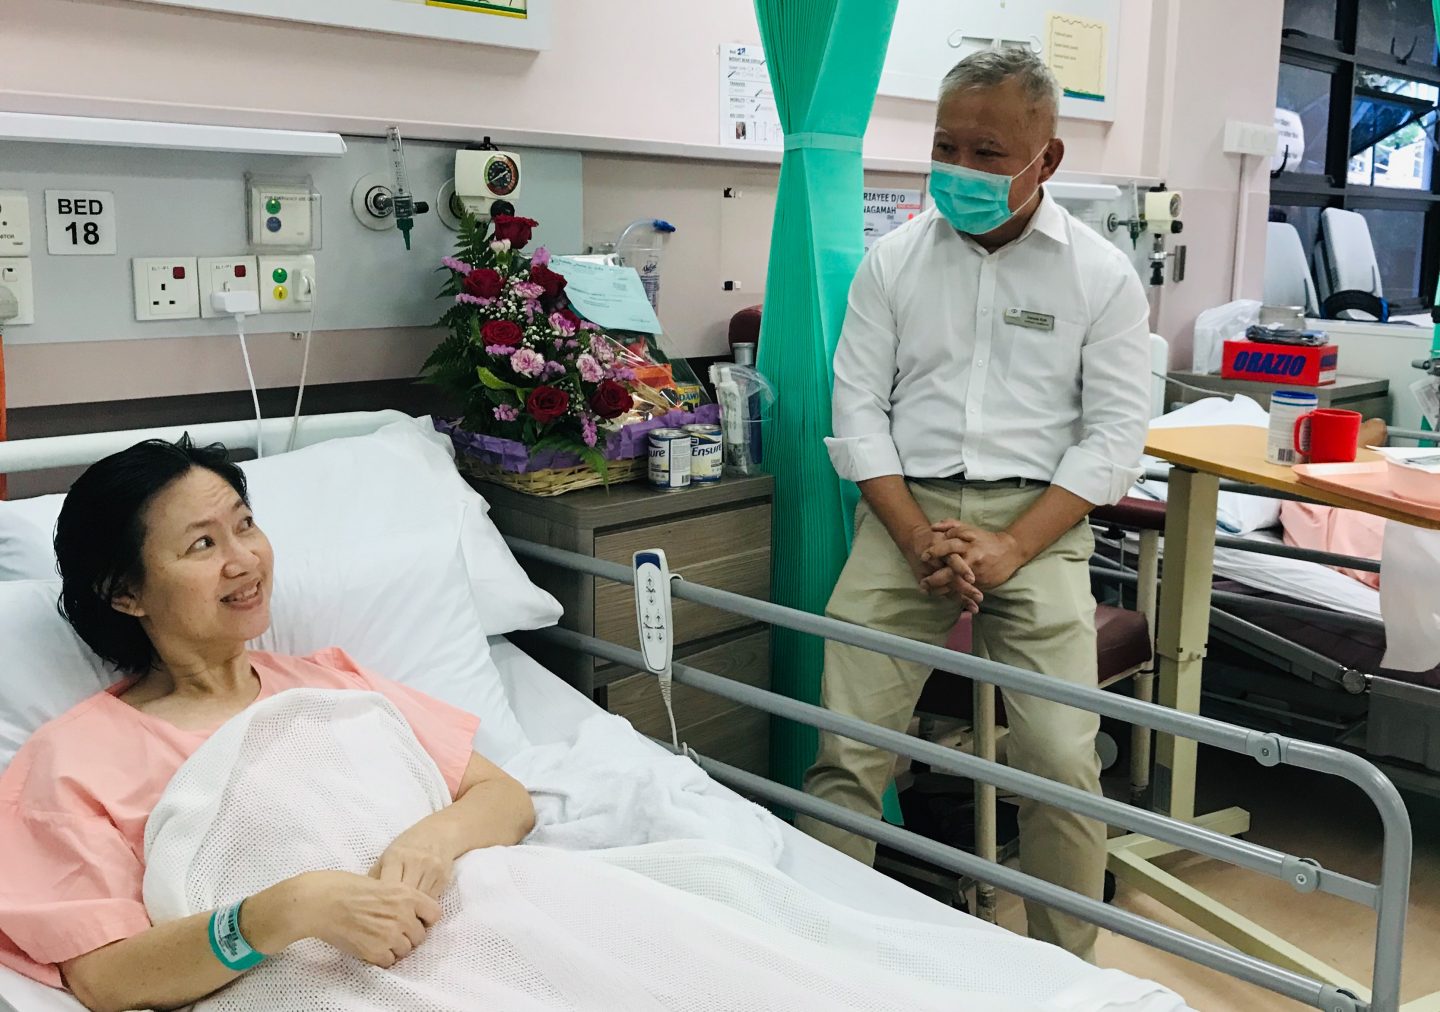 Mdm Tan Siew Huay, 55, another patient at St Luke's Hospital, with pastoral counsellor Dennis Koh. Mdm Tan found the broadcasts “refreshing” and wished the sessions were longer.